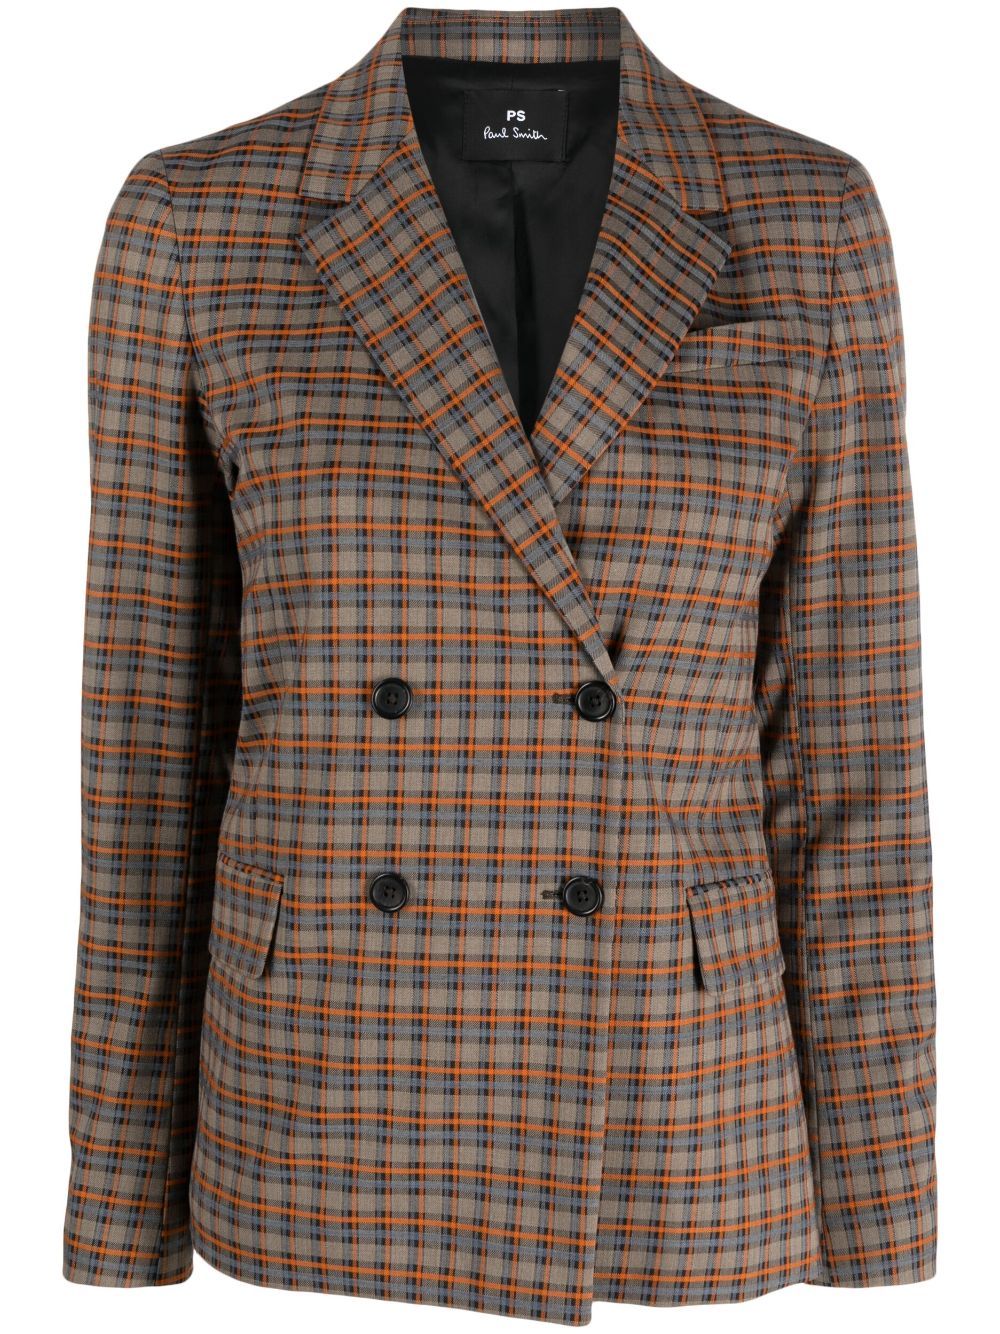 PS BY PAUL SMITH CHECKED DOUBLE BREASTED JACKET,W2R246JL31069